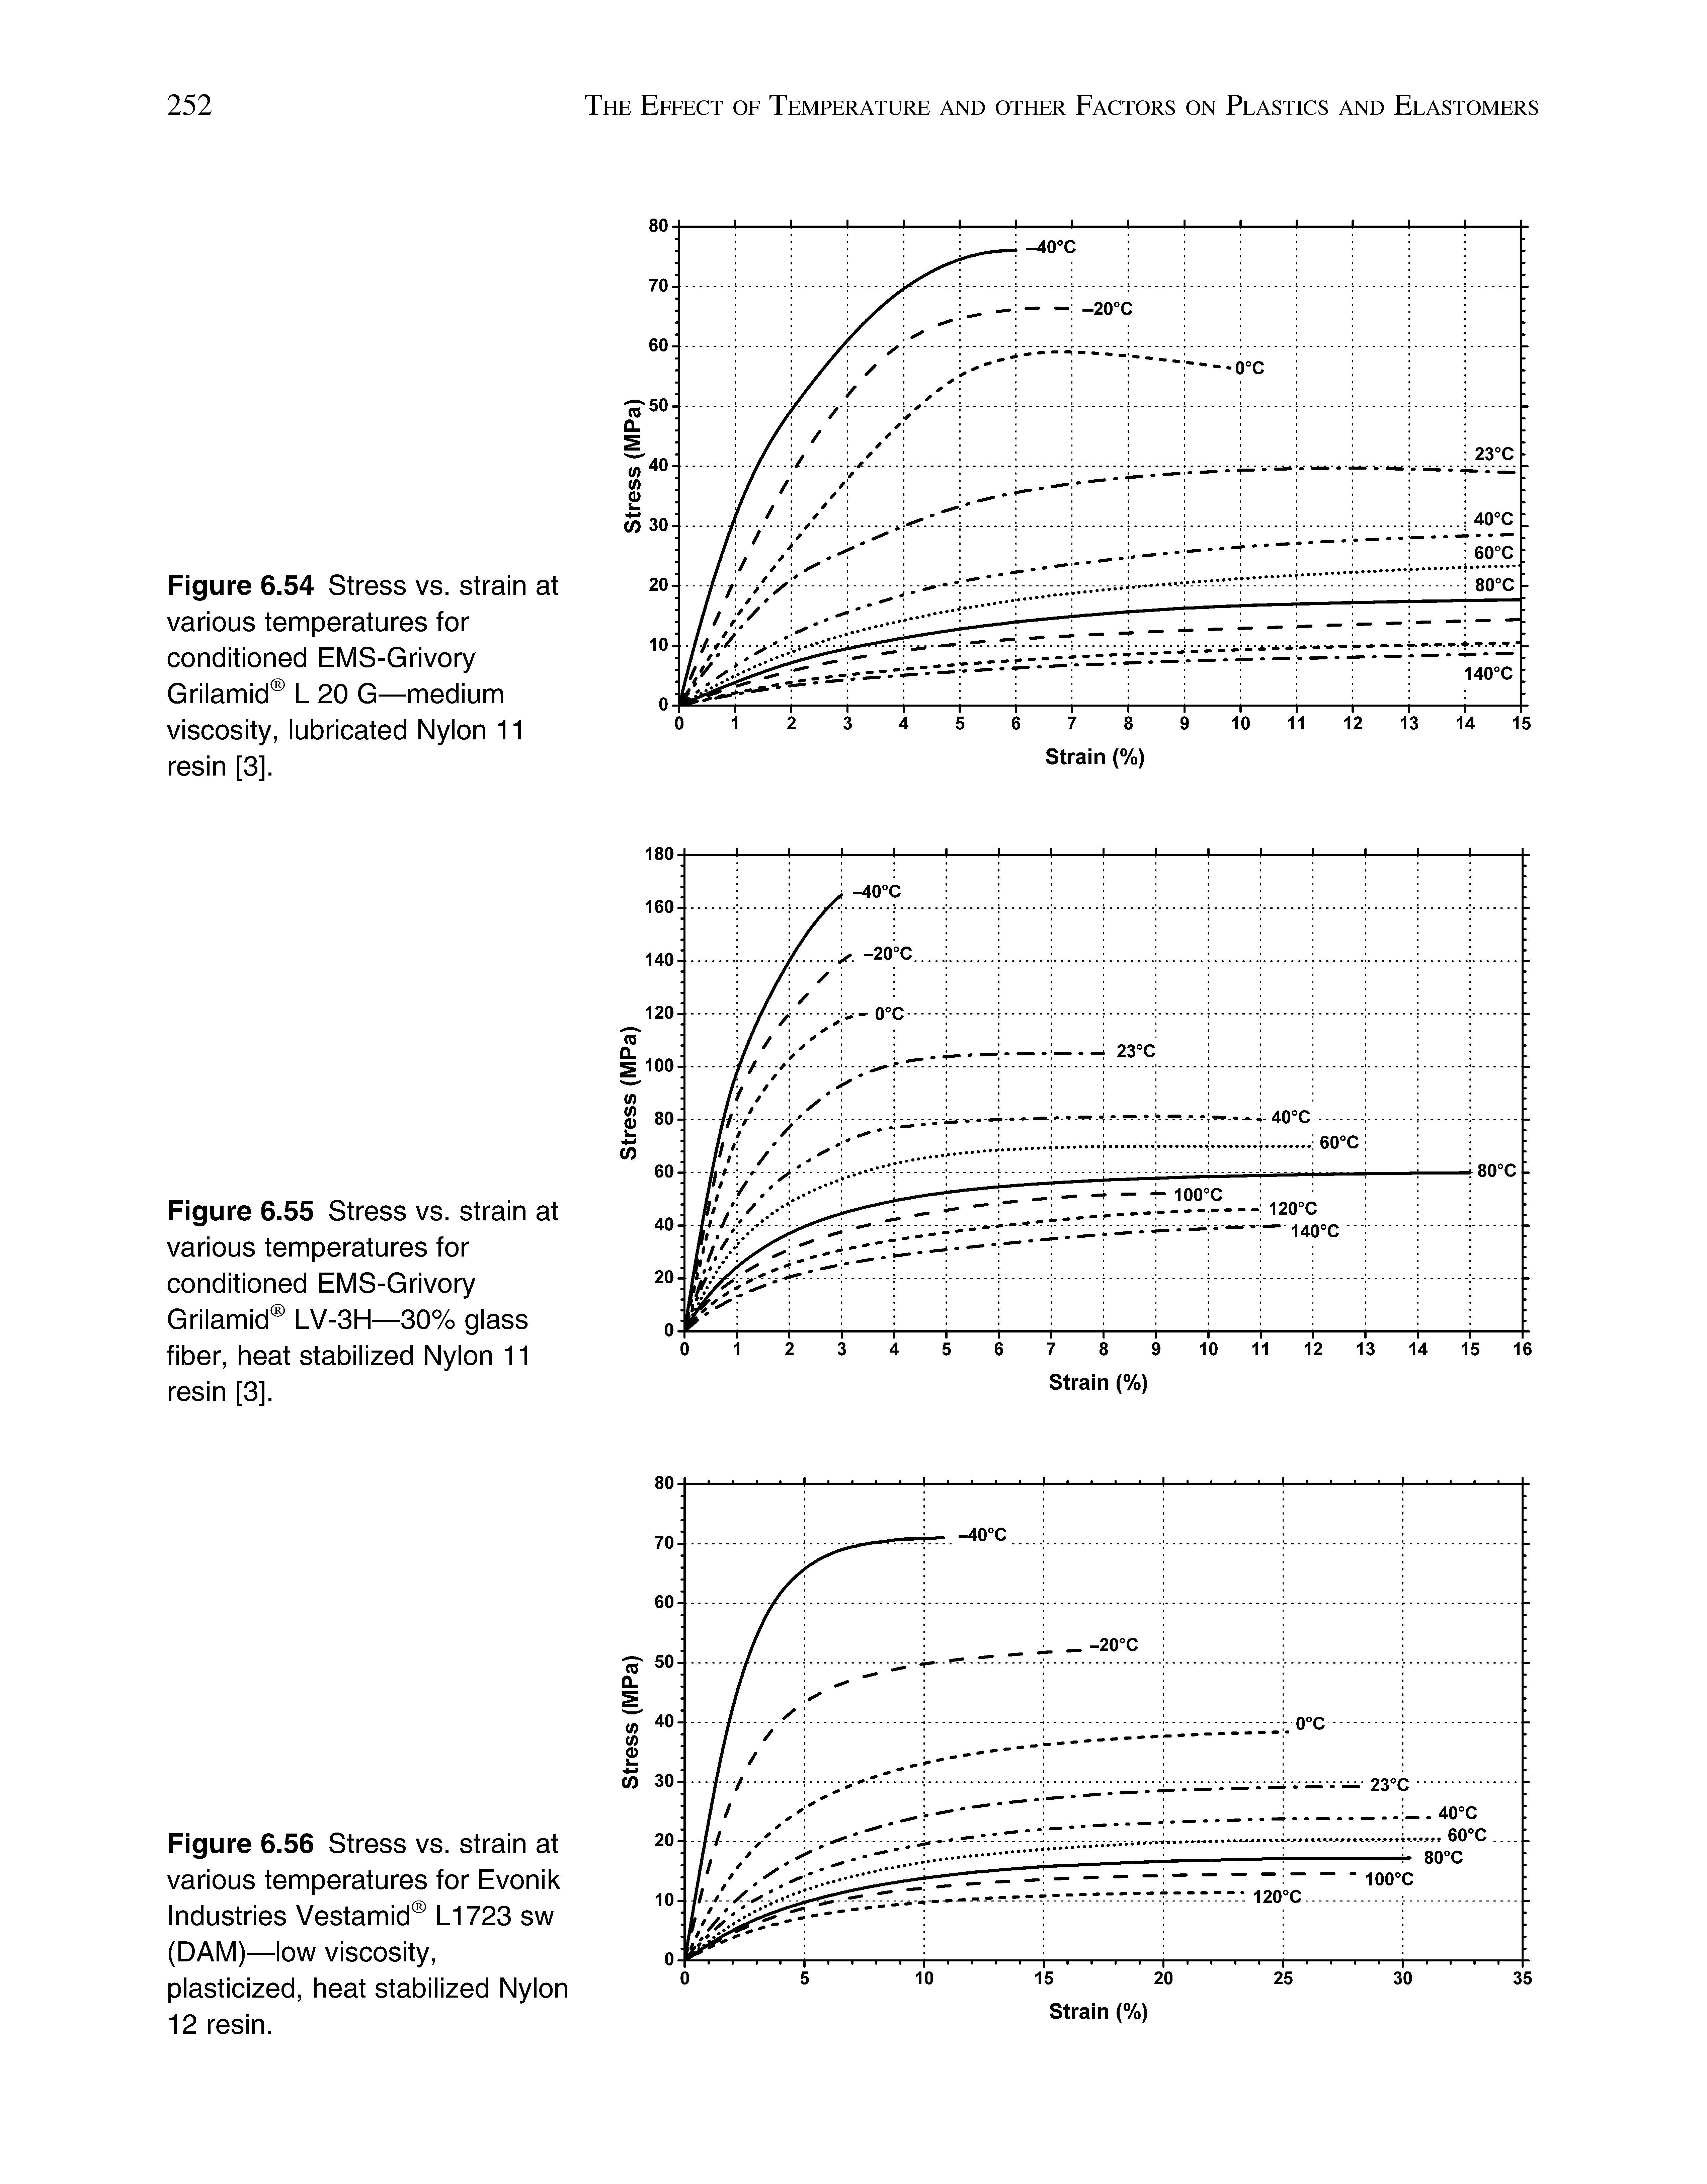 Figure 6.55 Stress vs. strain at various temperatures for conditioned EMS-Grivory Grilamid LV-3H—30% glass fiber, heat stabilized Nylon 11 resin [3].